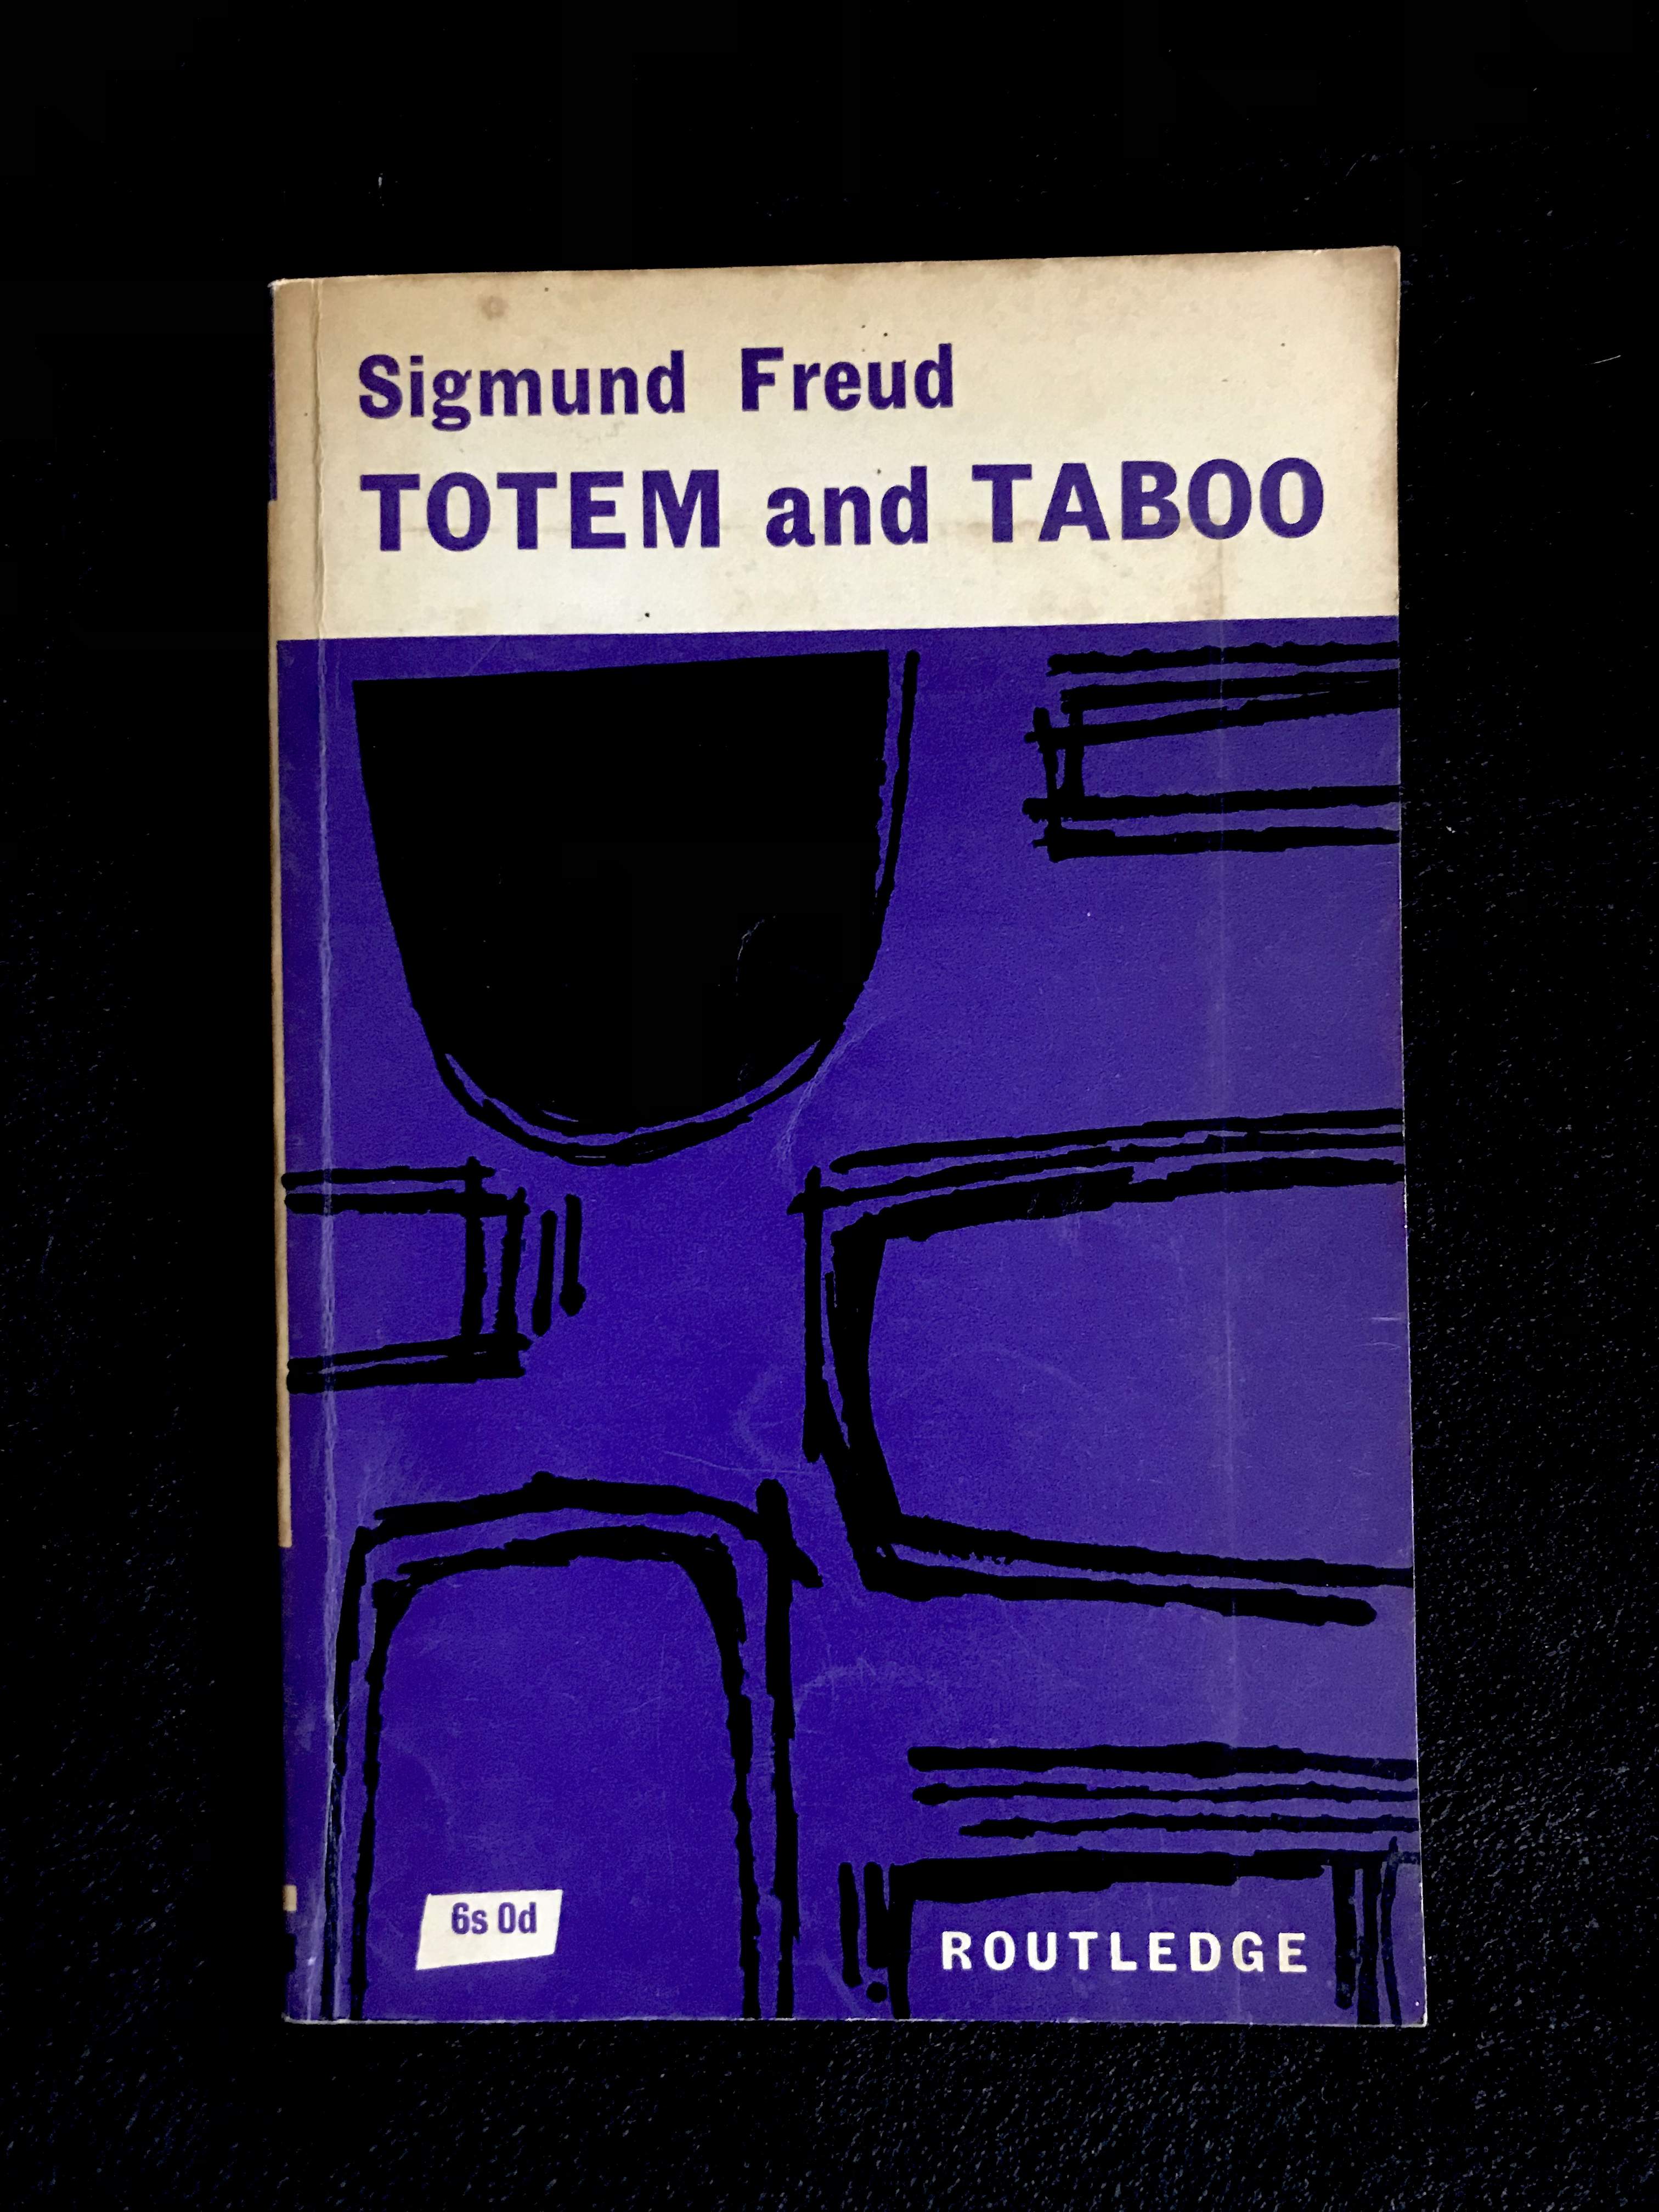 Totem And Taboo by Sigmund Freud